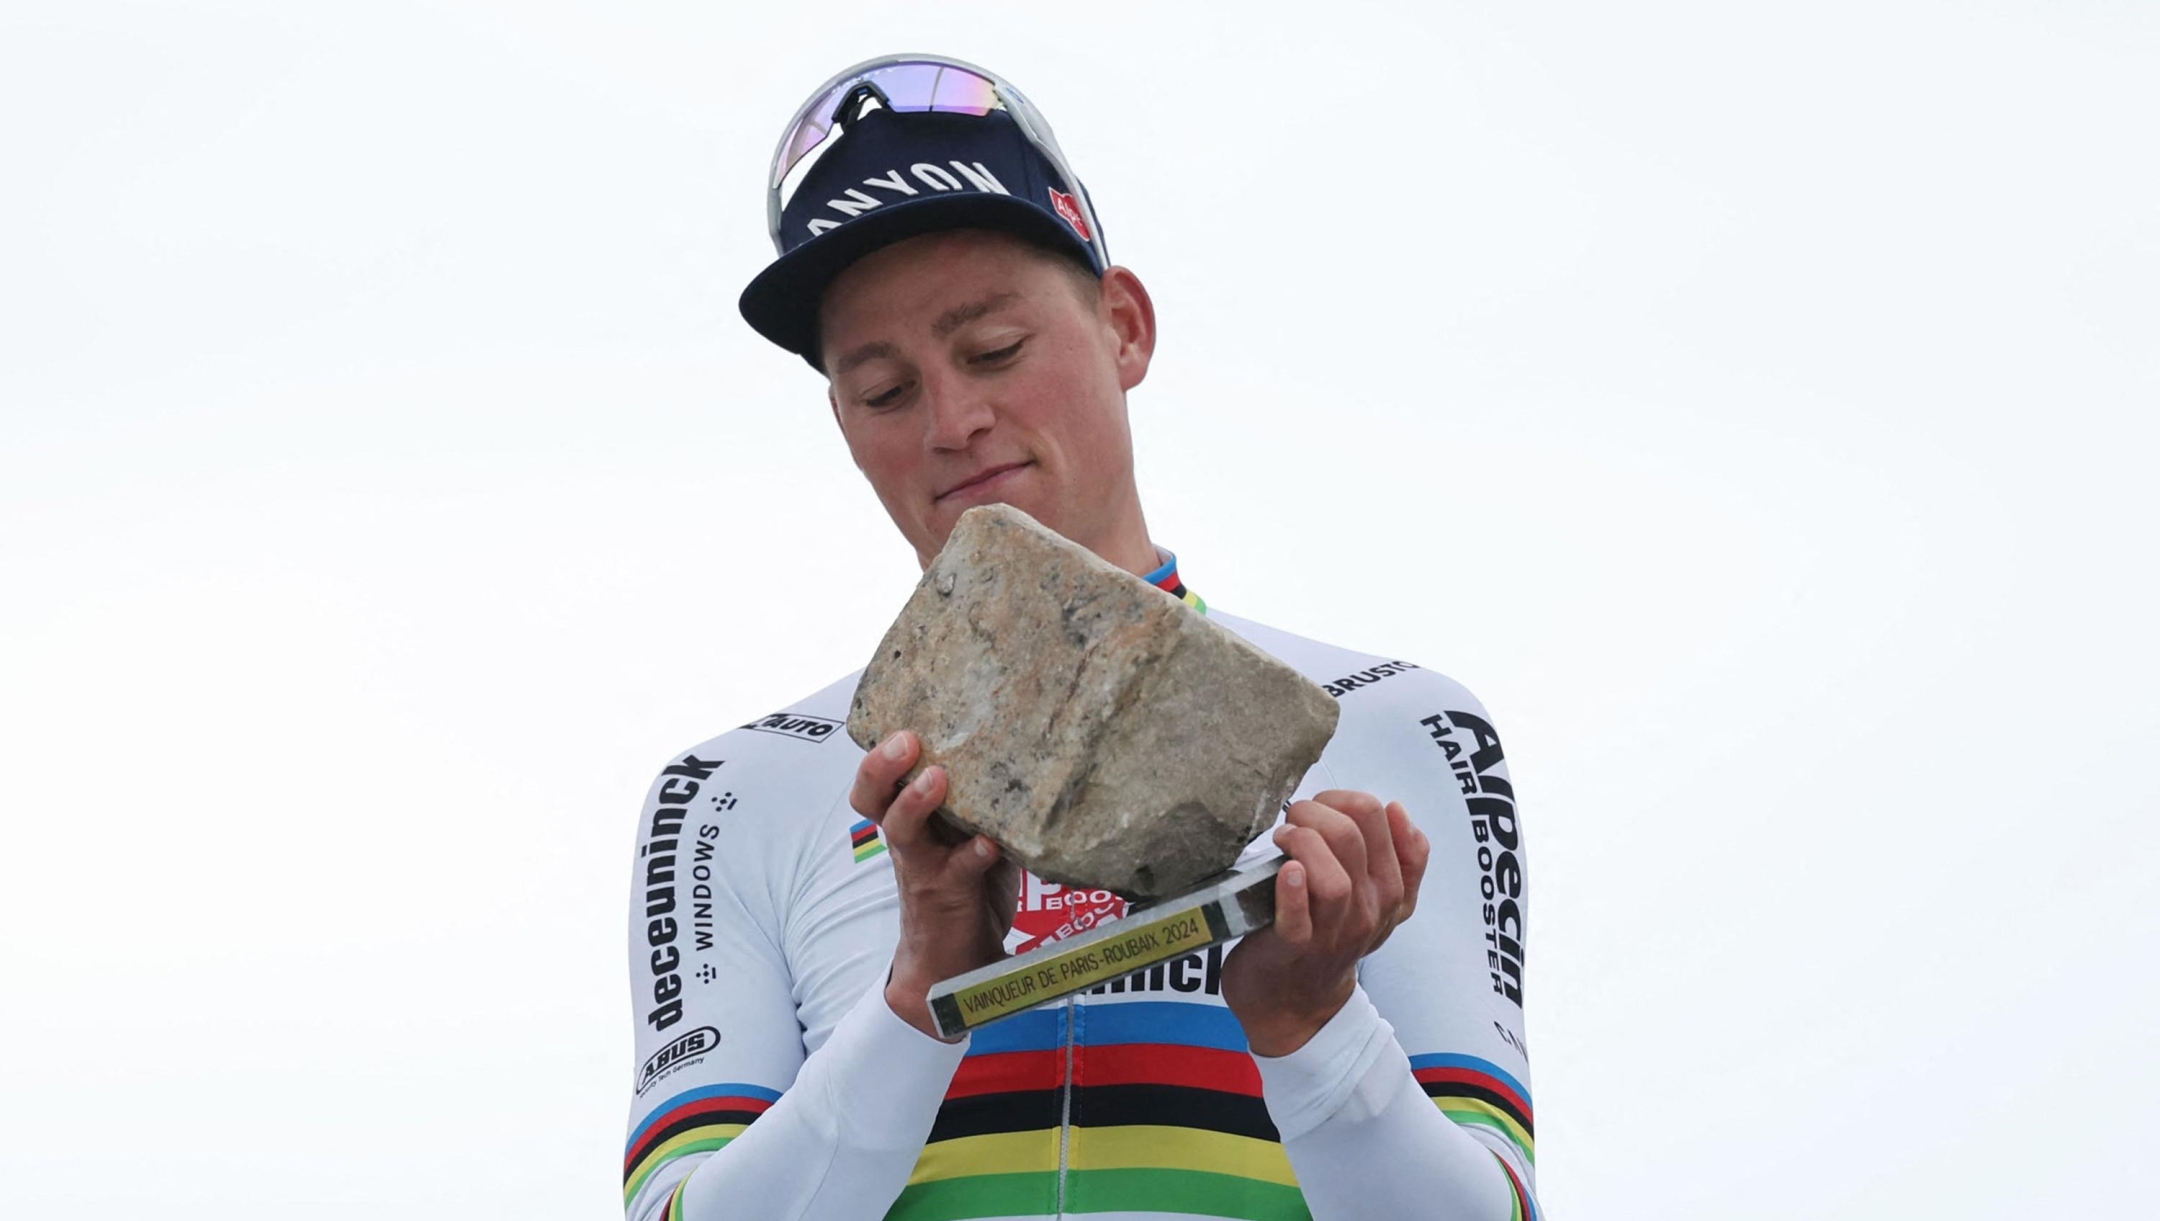 Alpecin - Deceuninck team's Dutch rider Mathieu Van Der Poel celebrates on the podium after winning the 121st edition of the Paris-Roubaix one-day classic cycling race, 260km between Compiegne and Roubaix, northern France, on April 7, 2024. (Photo by Francois LO PRESTI / AFP)